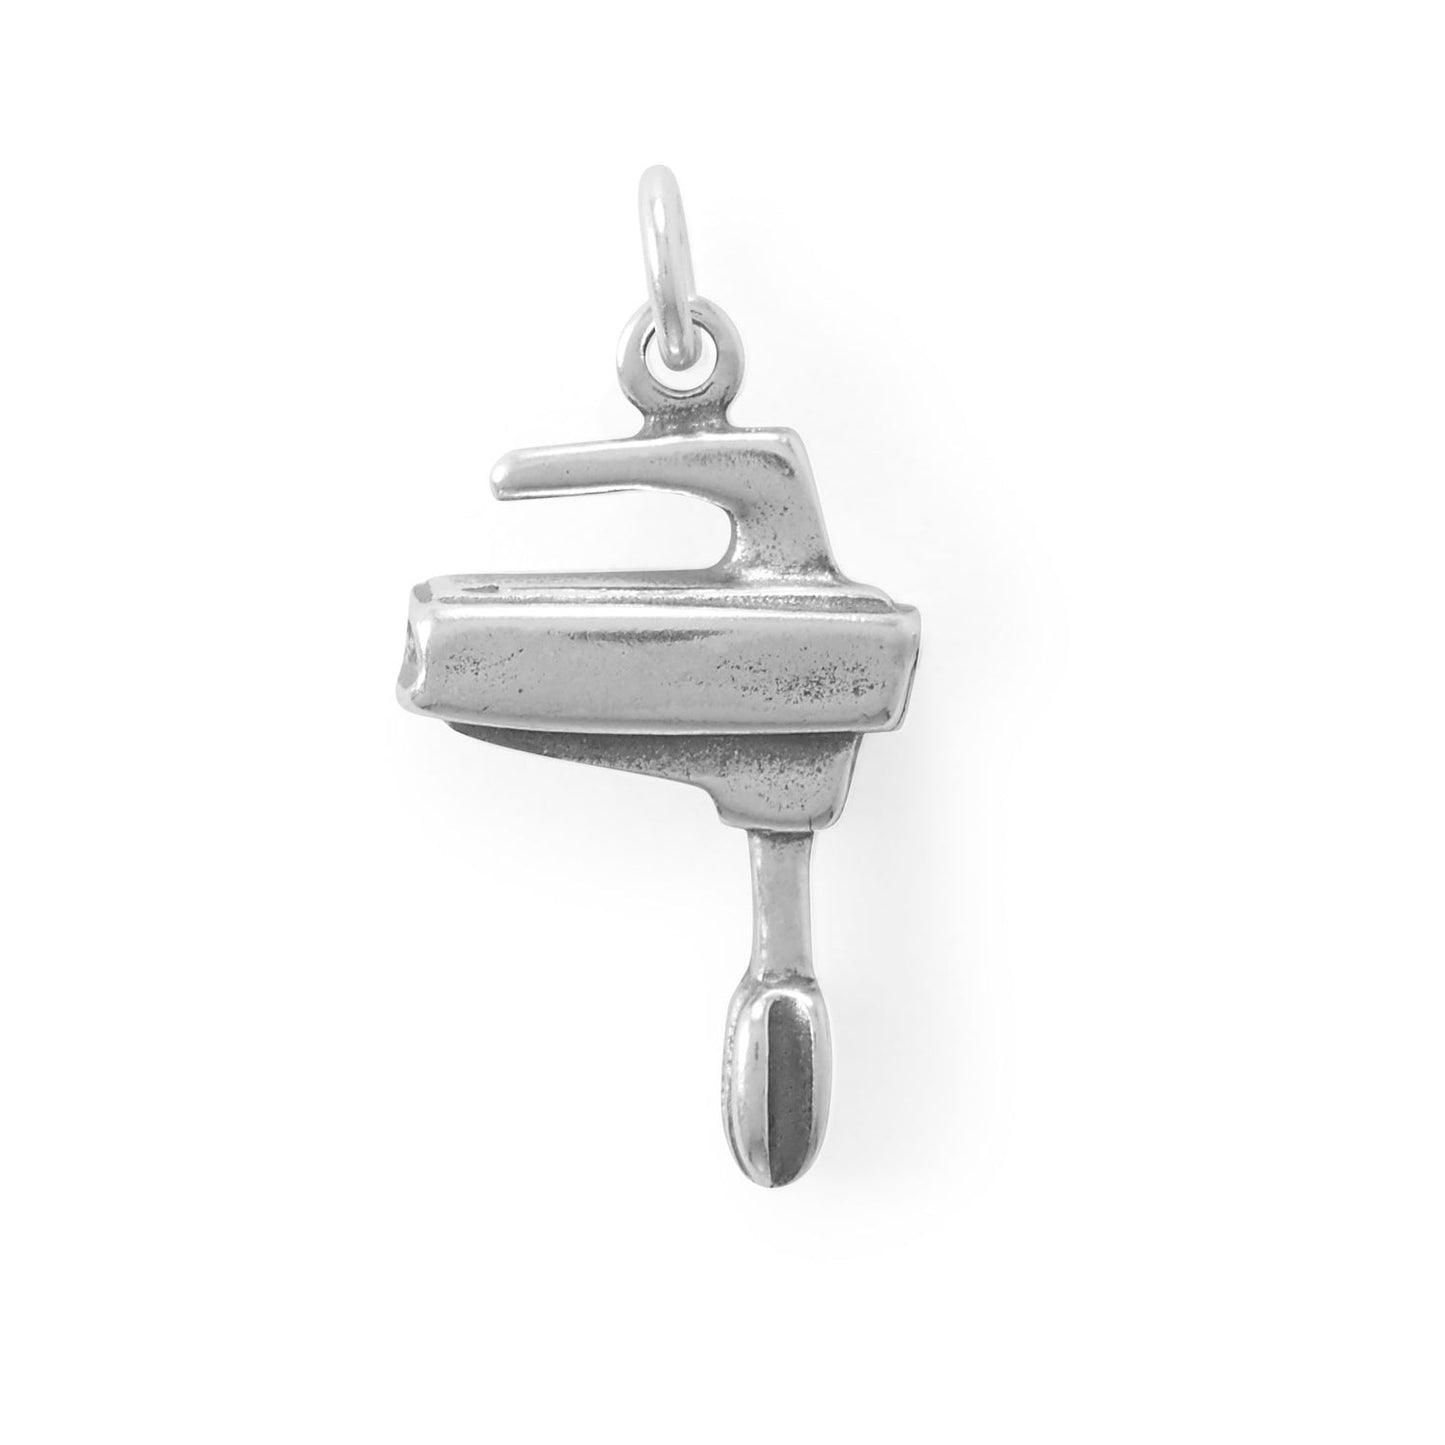 Sterling Silver Bake It Sweet! Hand Mixer Charm